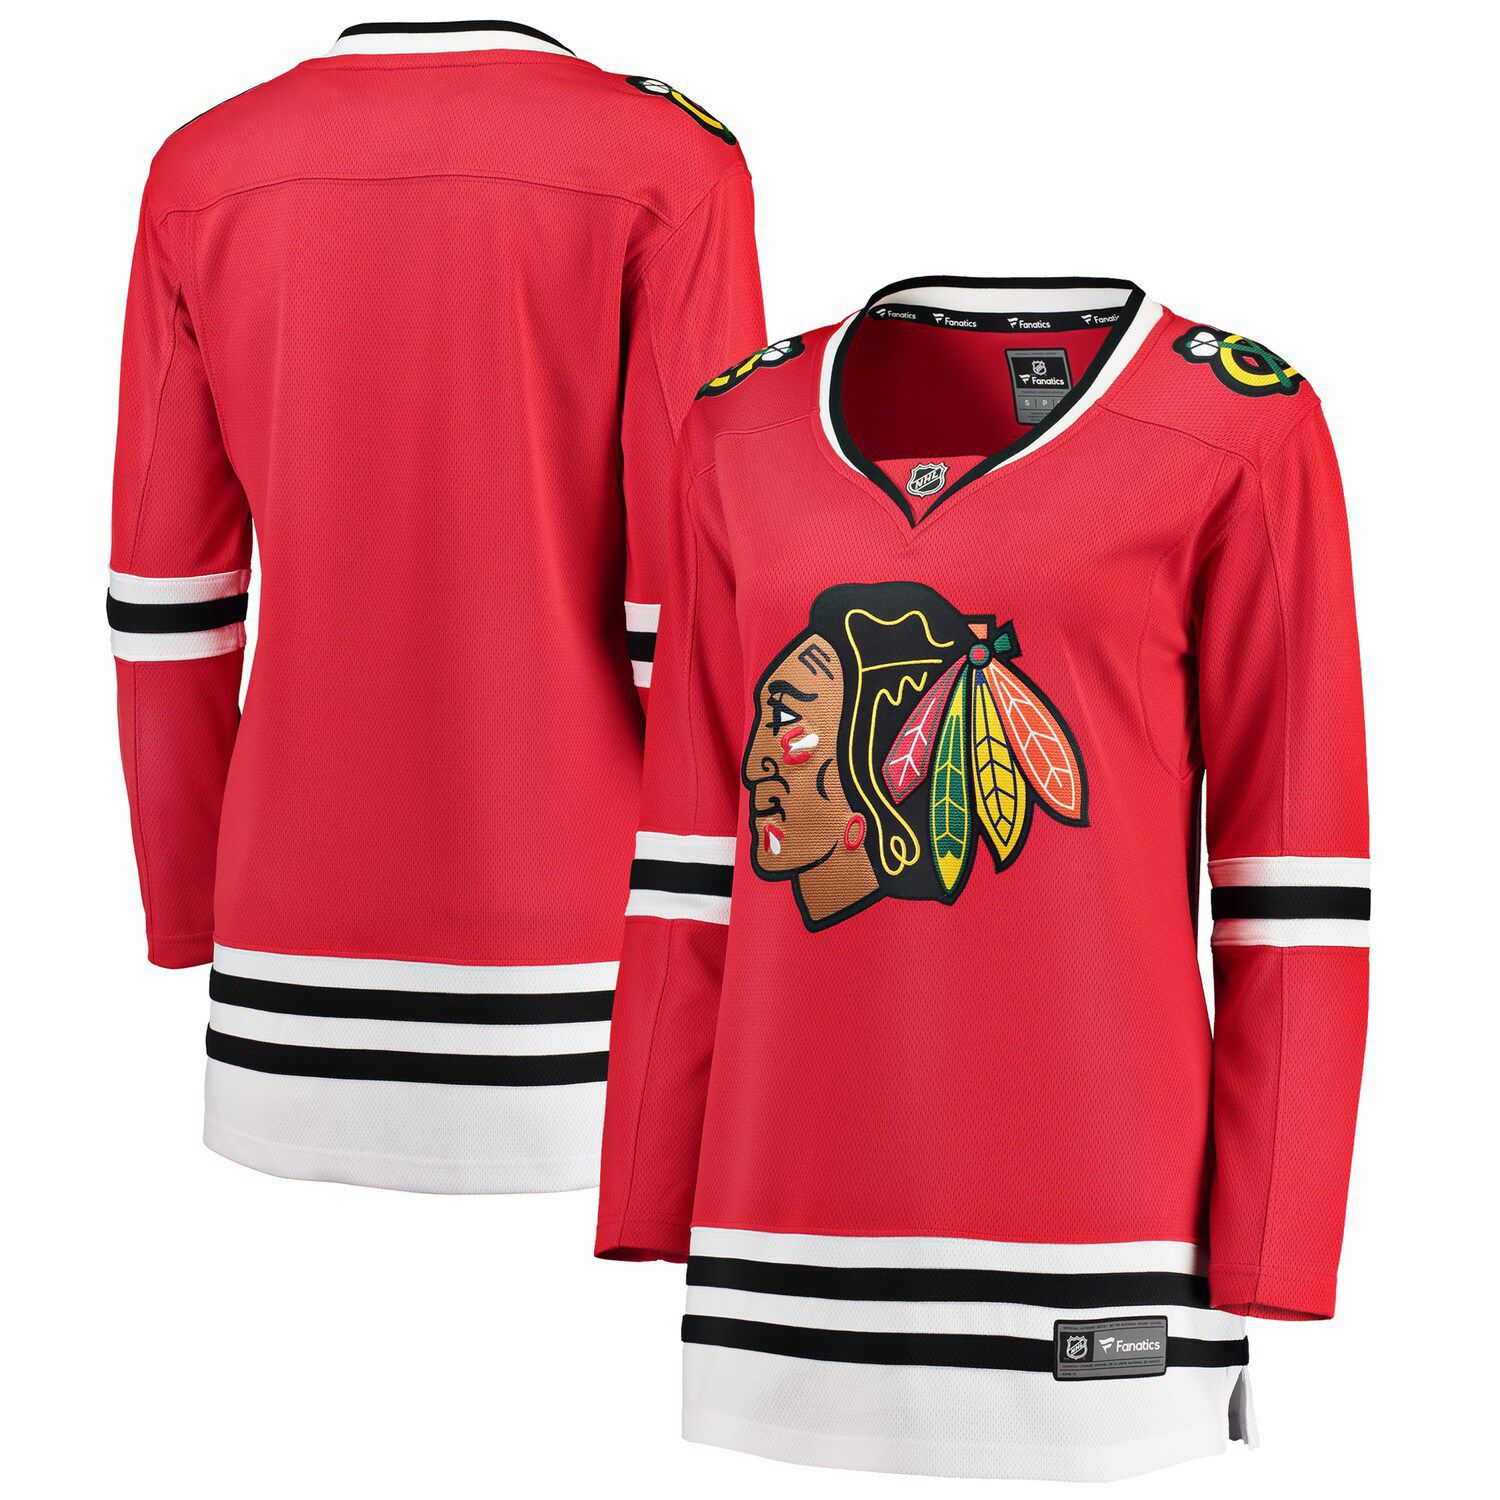 Men's Connor Bedard Chicago Blackhawks Adidas Red Home Primegreen Authentic Pro Jersey 52 (L) / Red